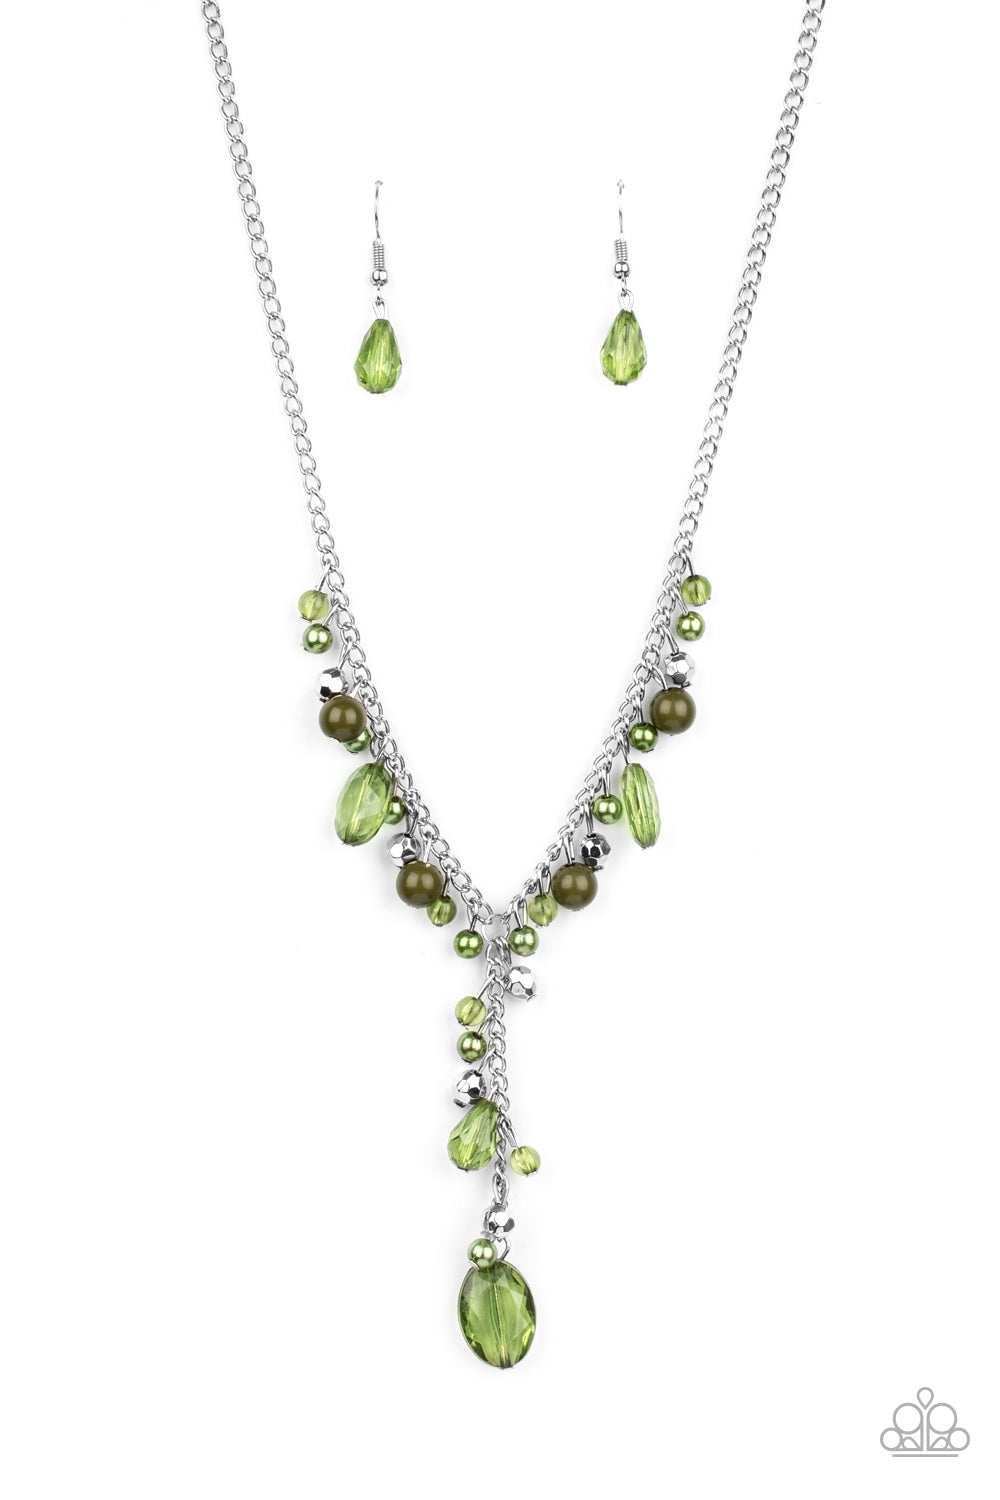 Paparazzi Accessories Crystal Couture - Green Necklaces - Lady T Accessories